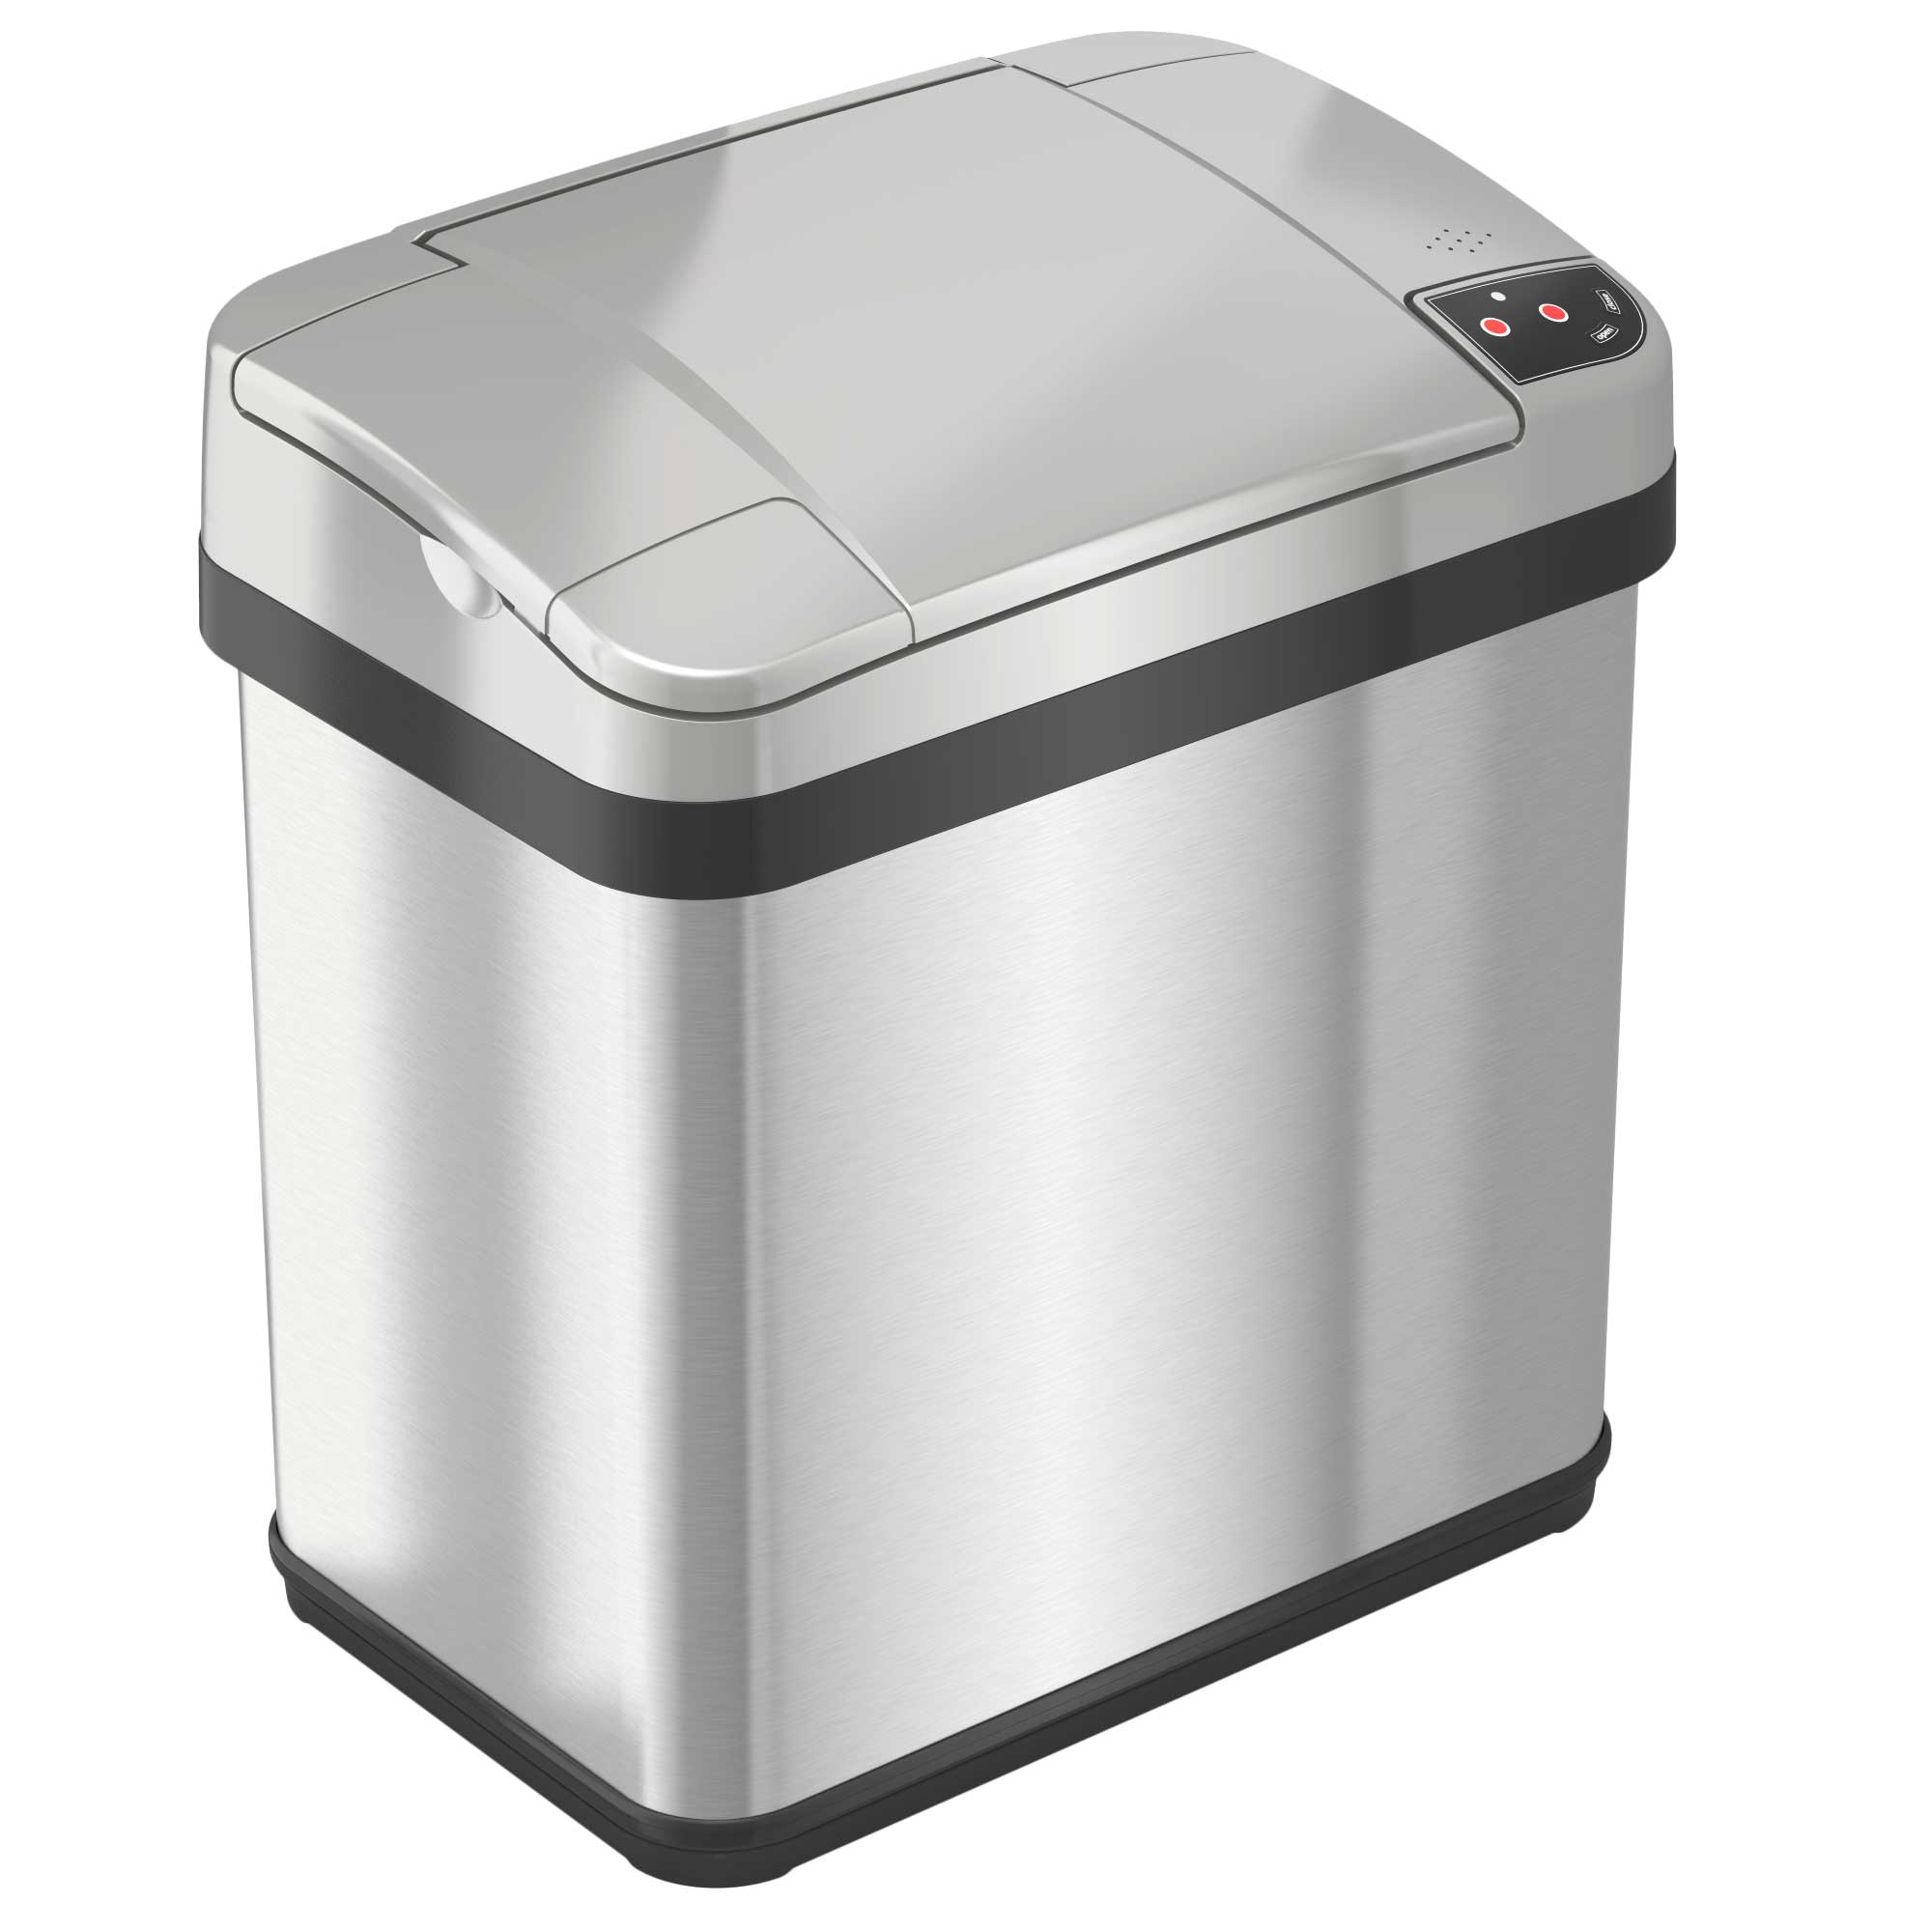 13 Gallon and 2.5 Gallon Kitchen and Bathroom Sensor Trash Cans Combo –  iTouchless Housewares and Products Inc.